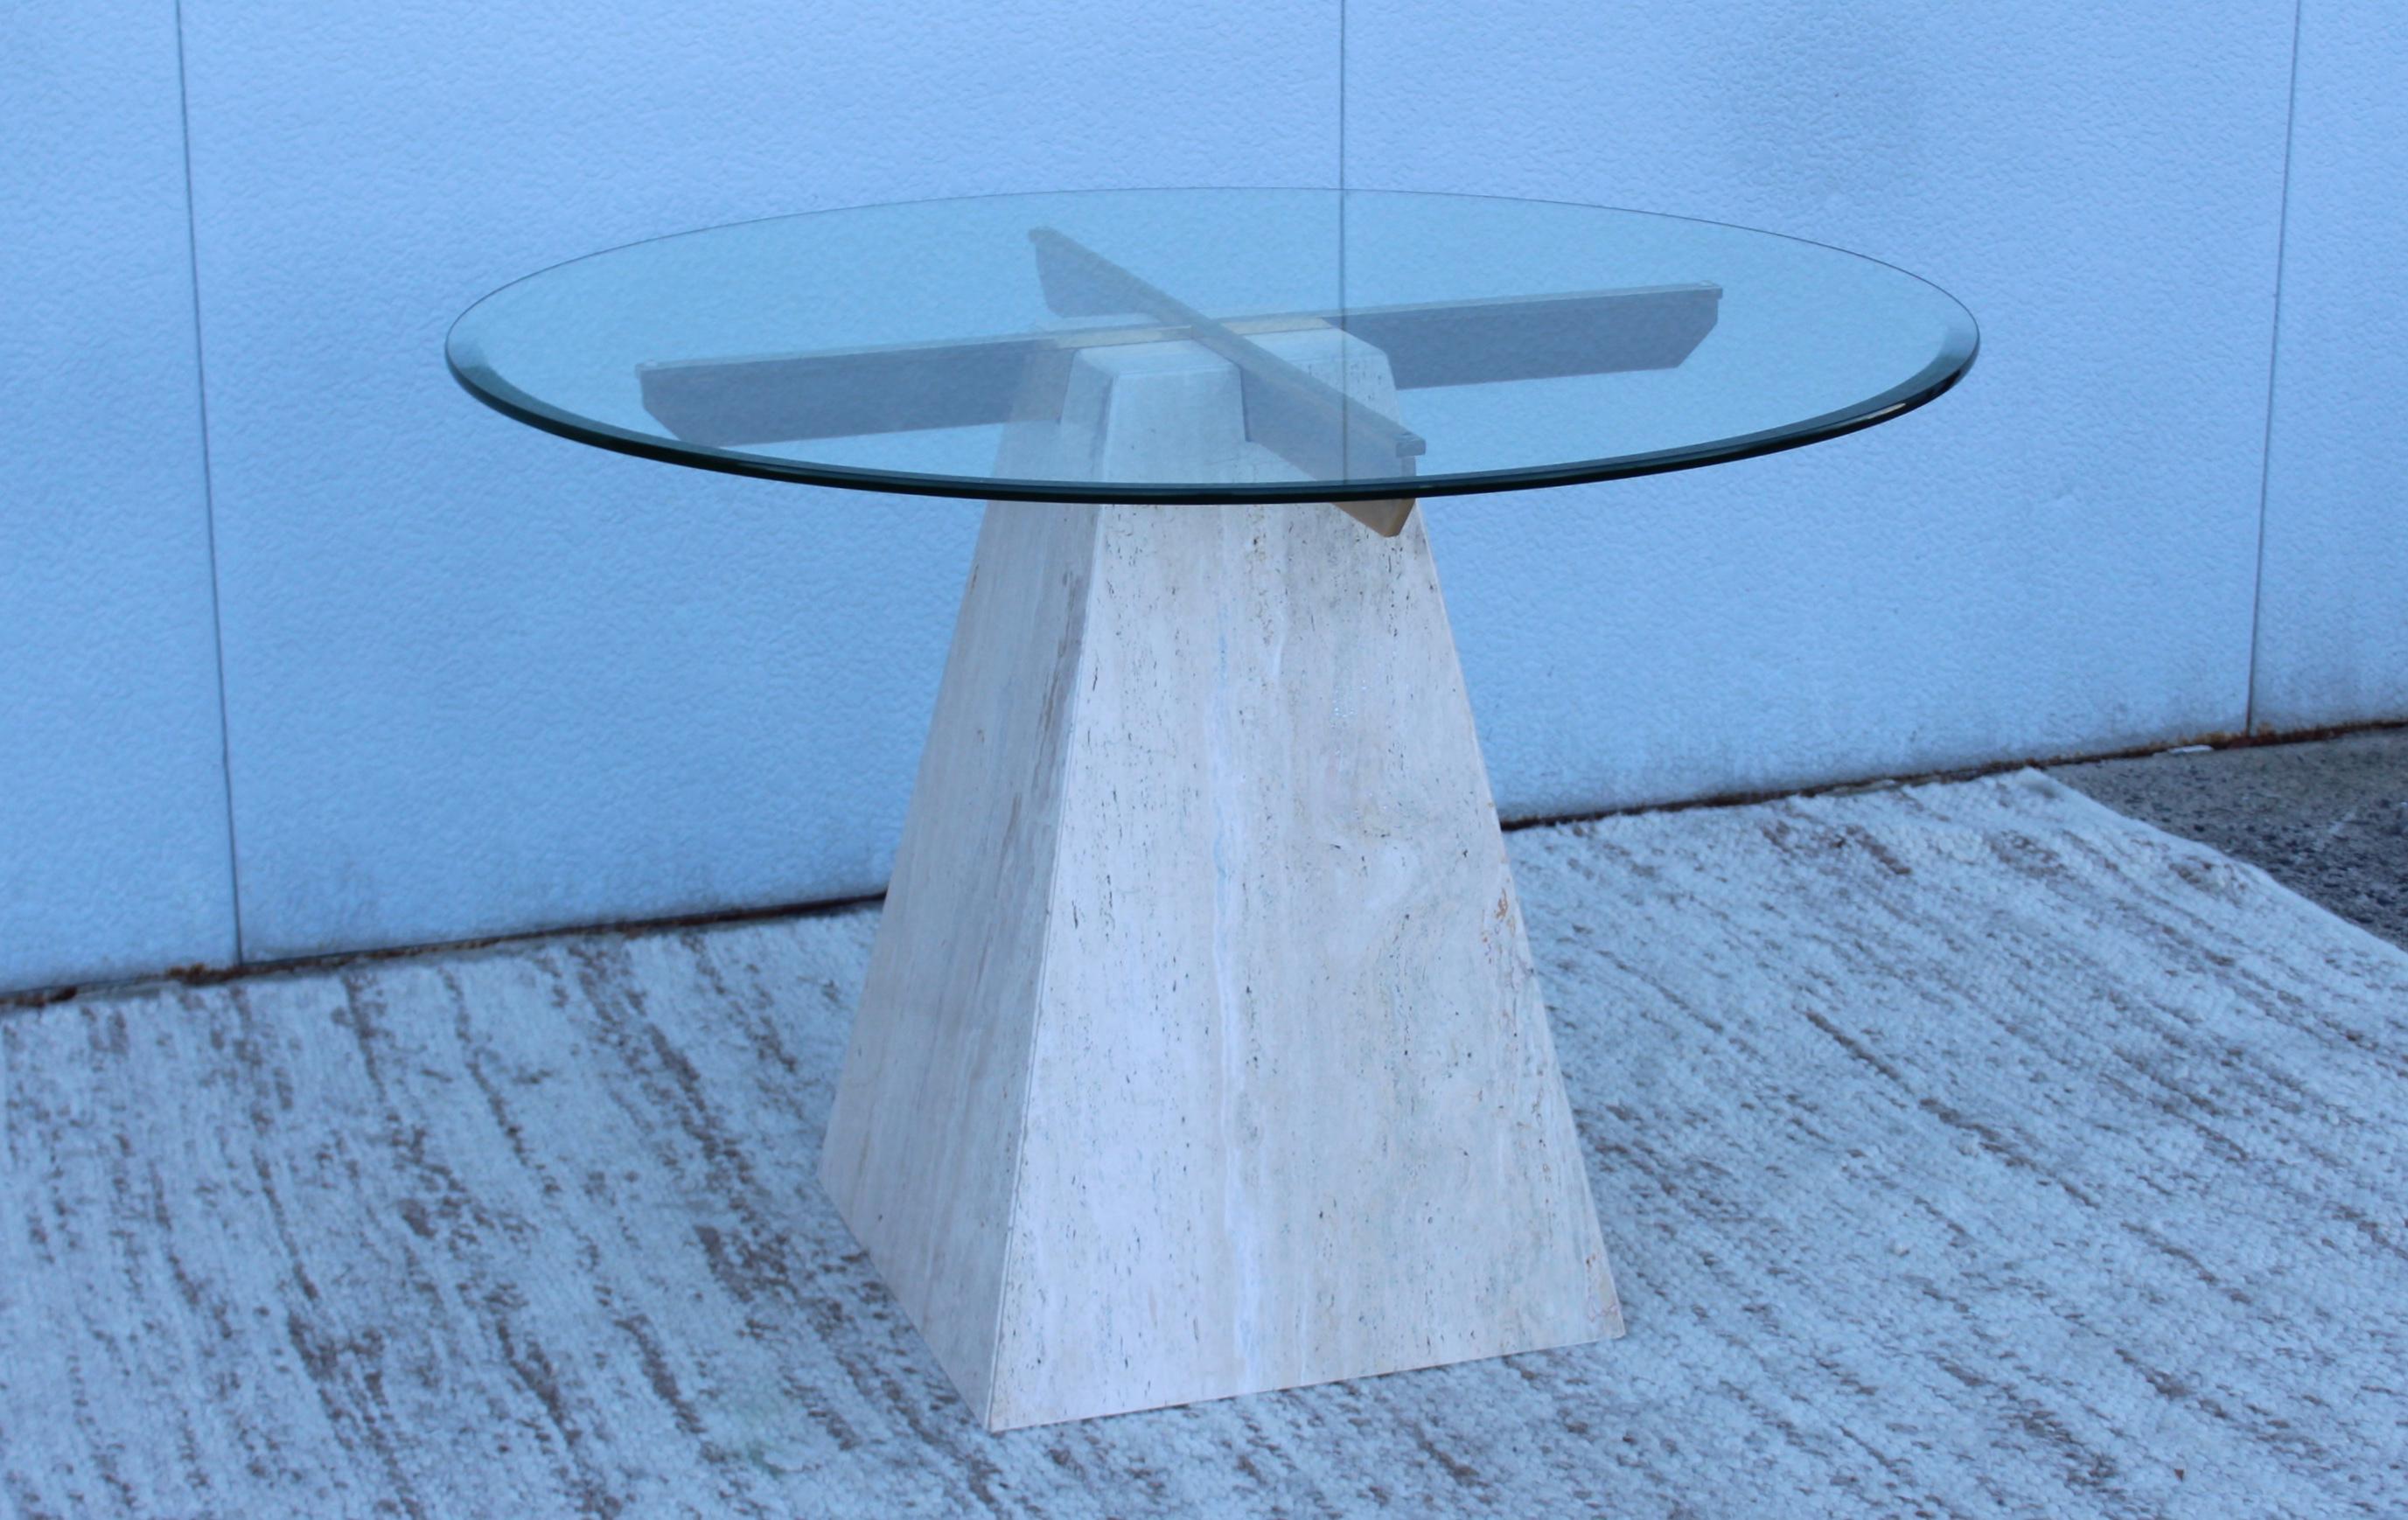 Stunning 1970s modern travertine base with glass top Italian dining table. In vintage original condition with minor wear and patina due to age and use.